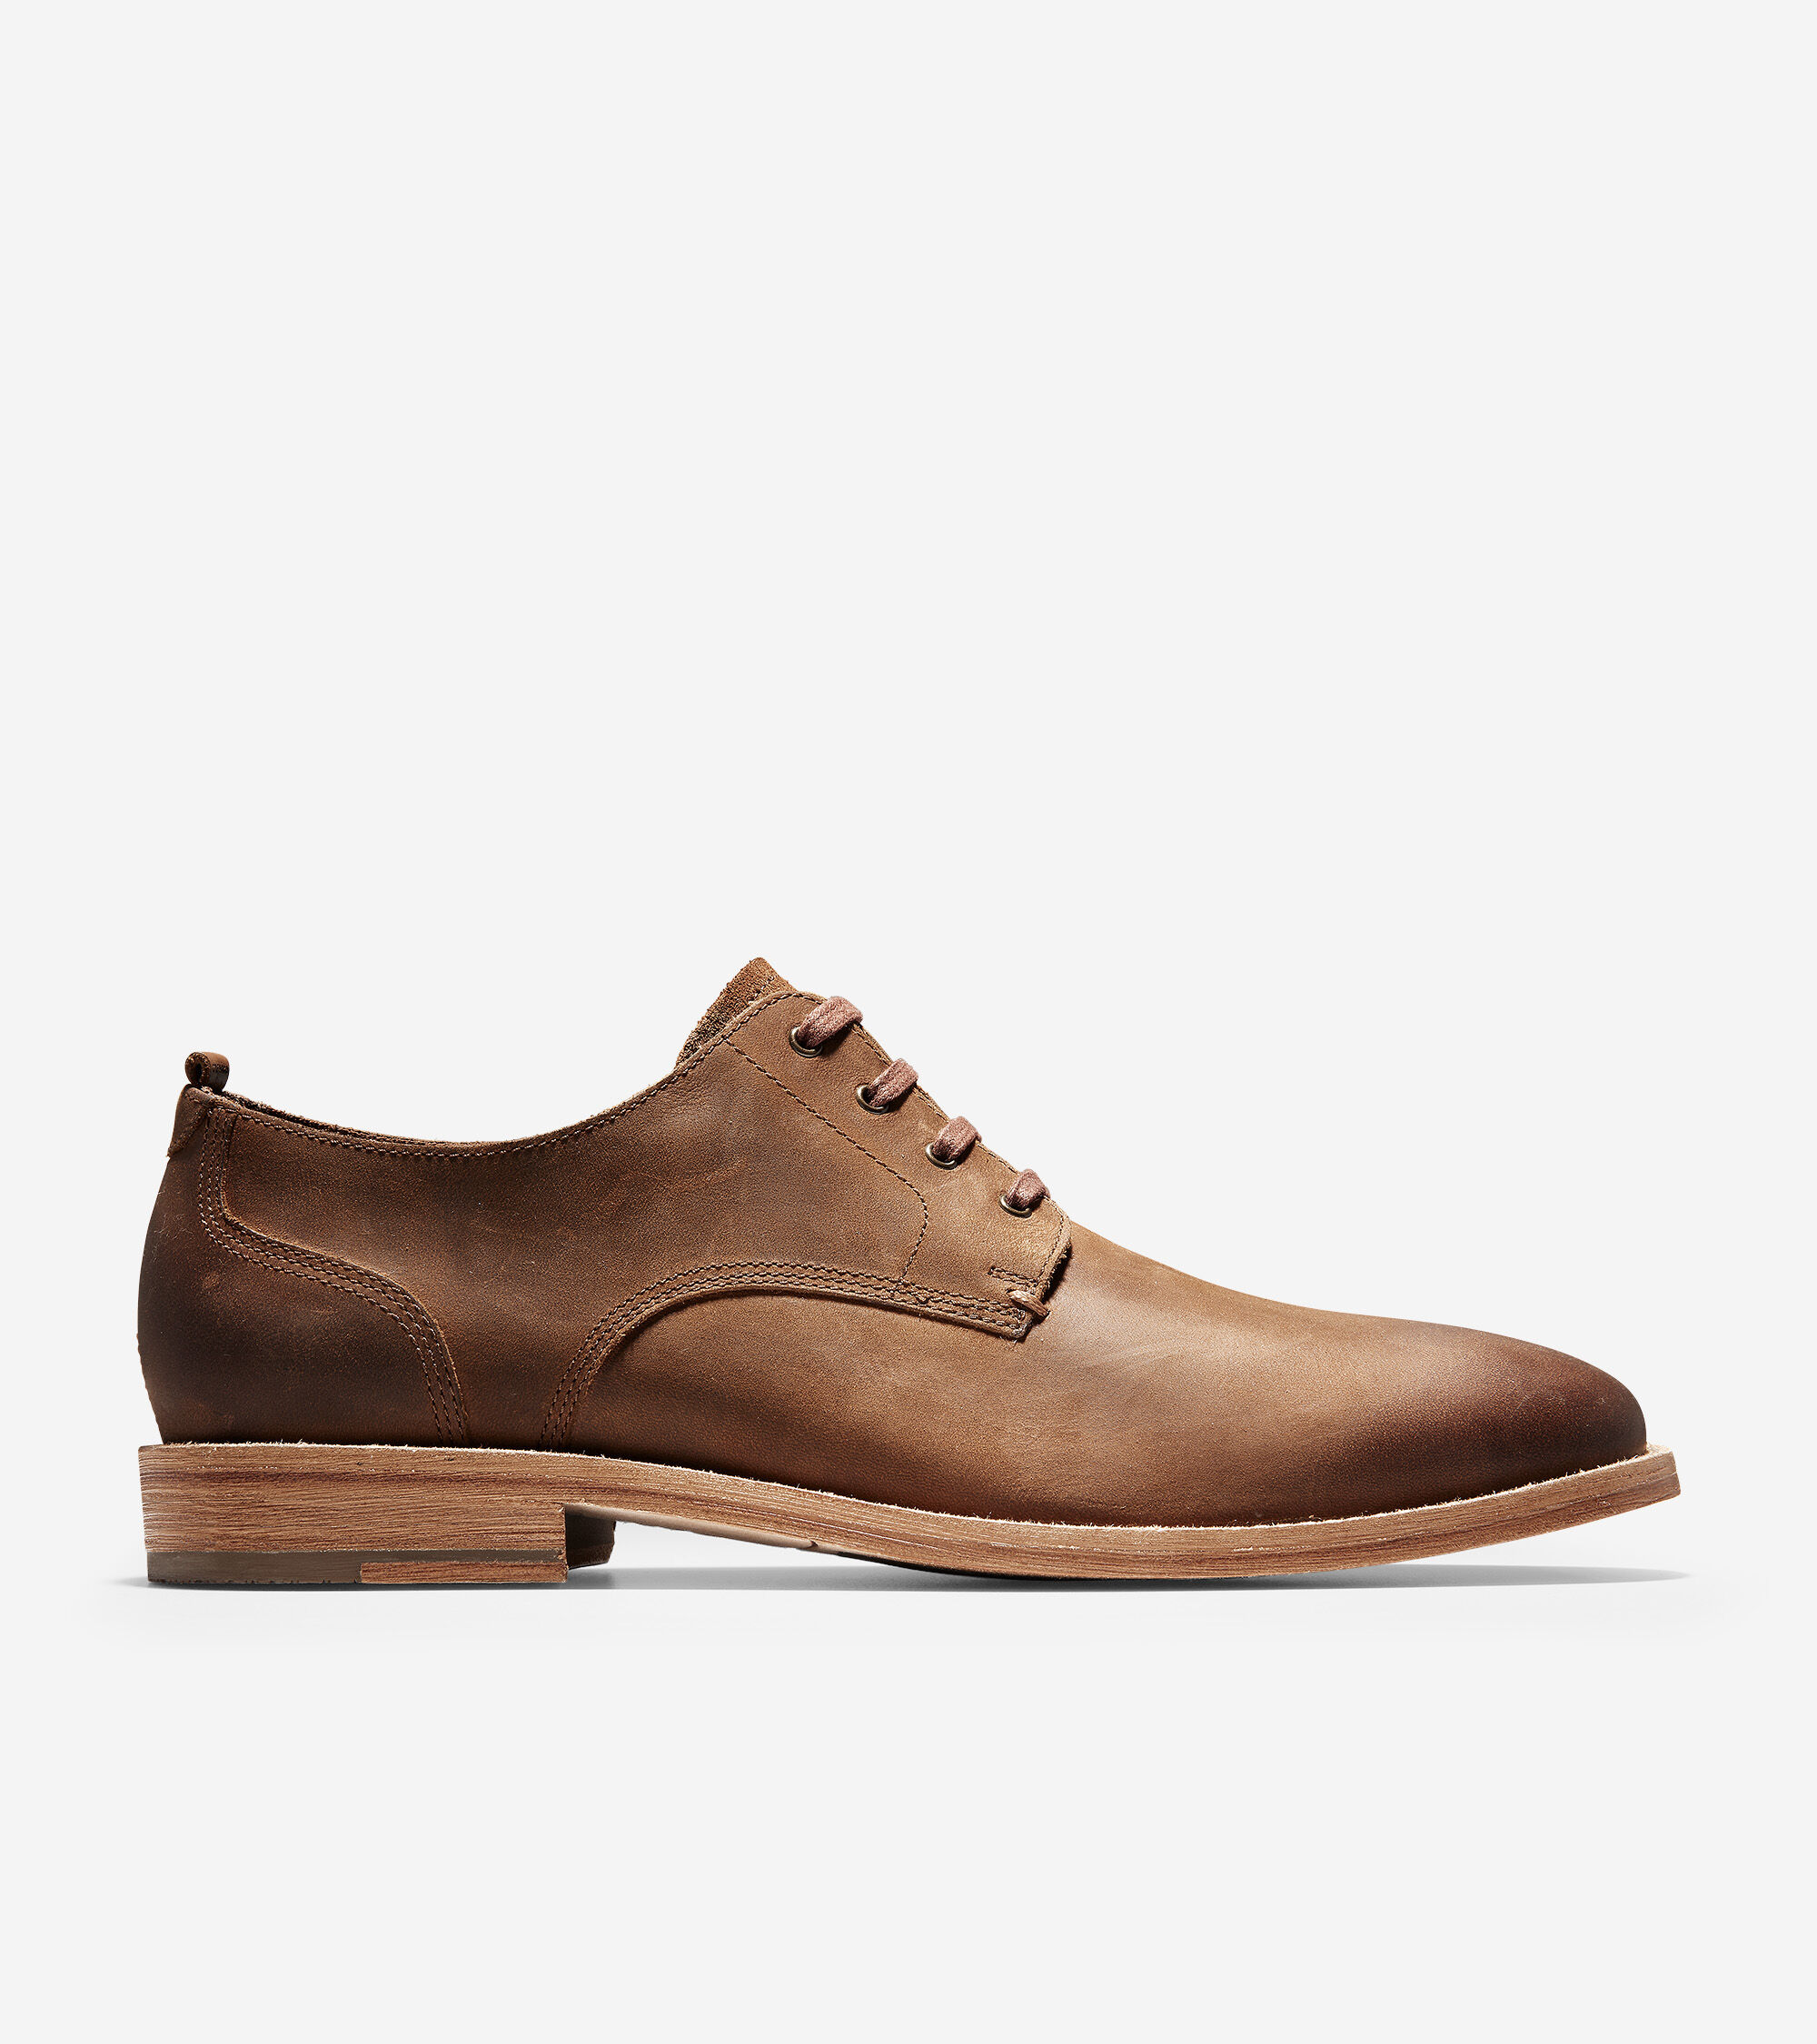 cole haan mens shoes usa